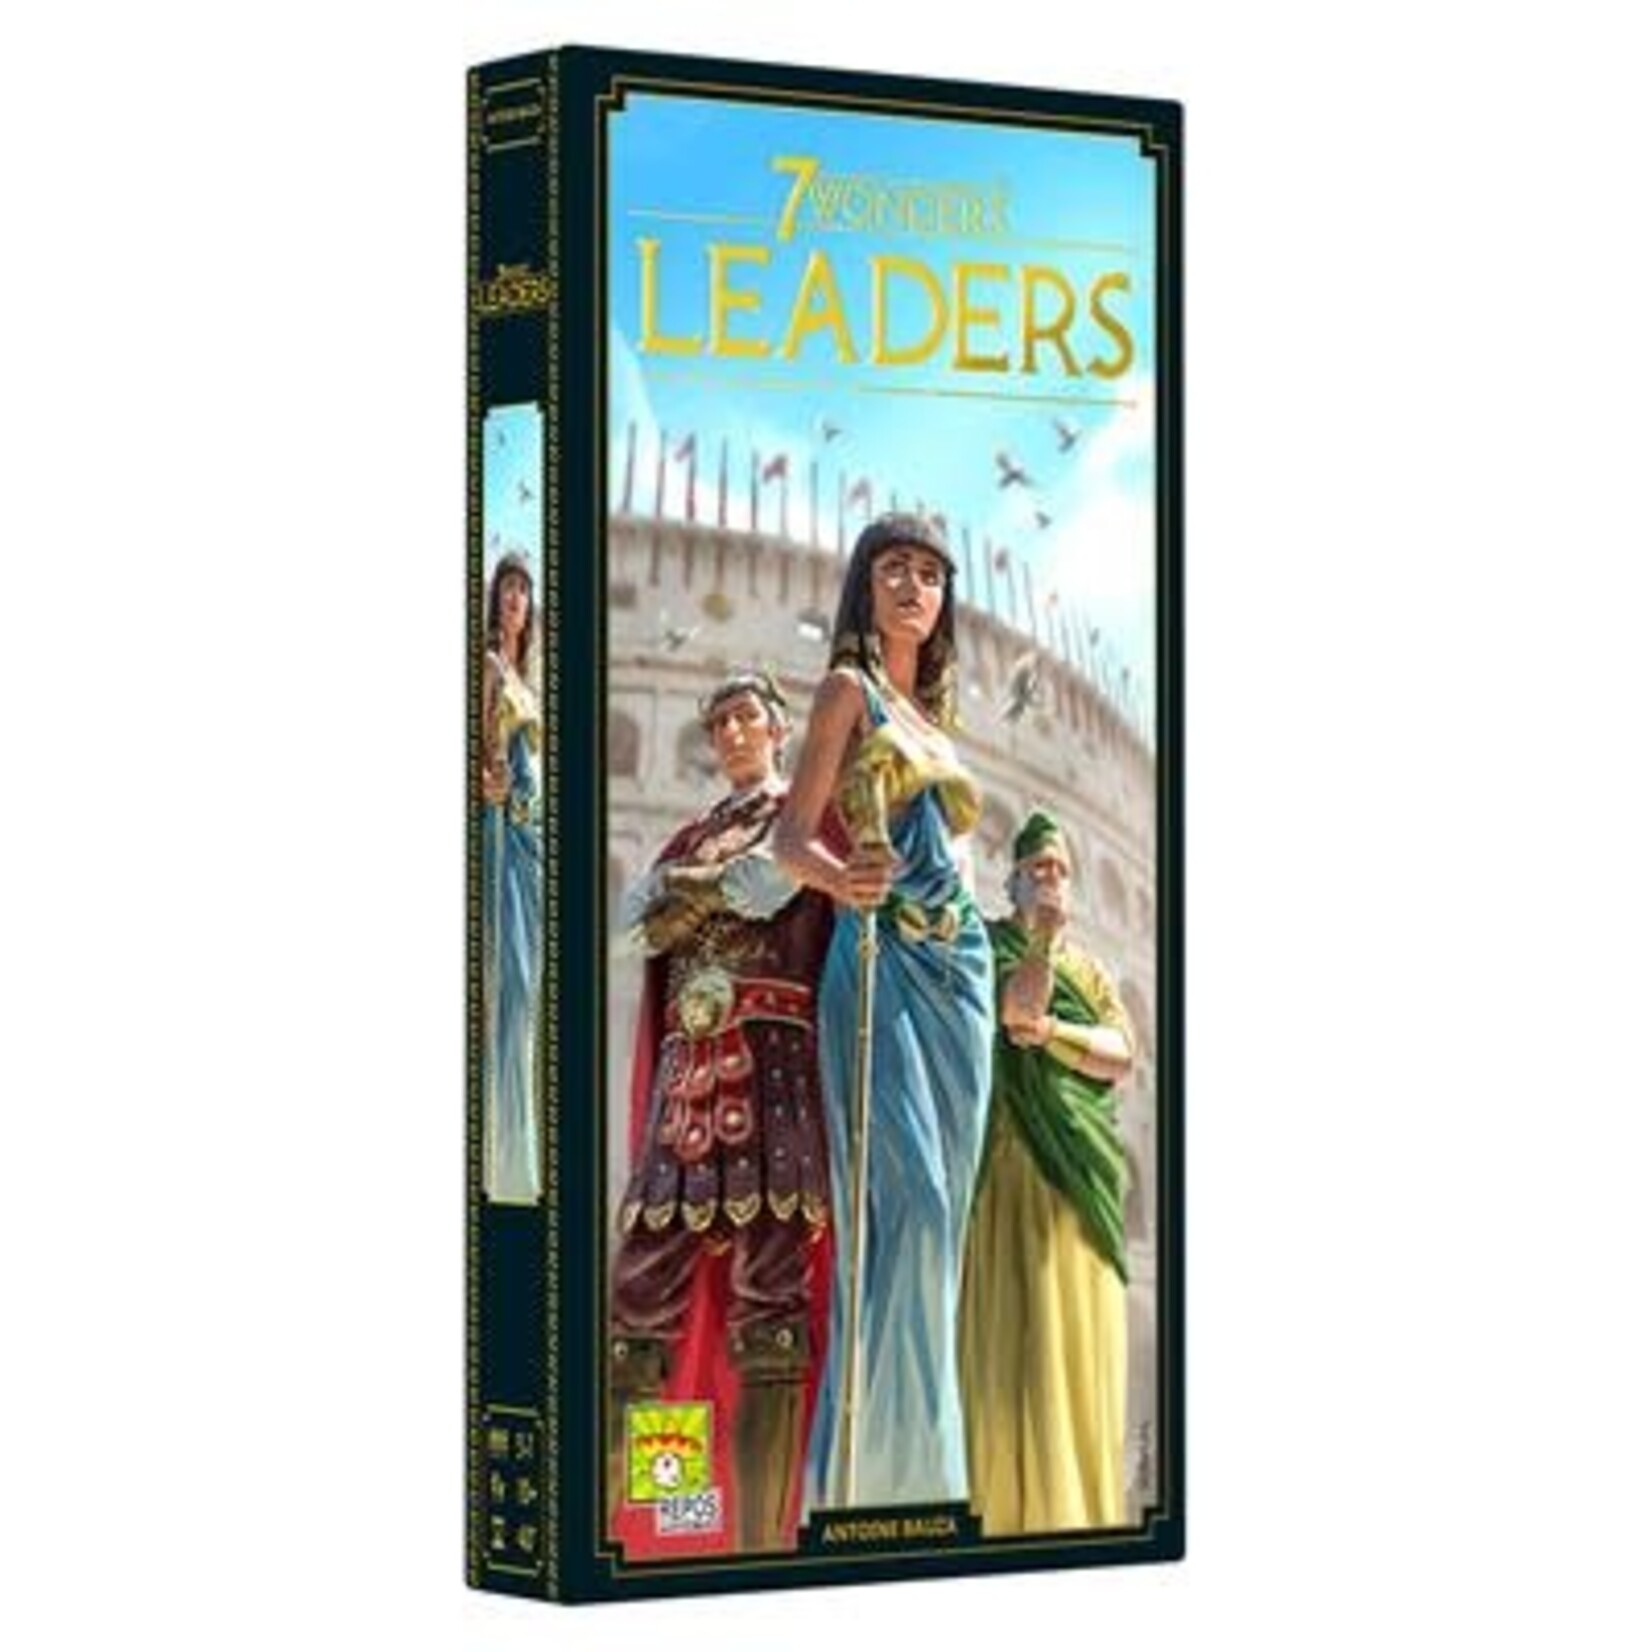 Repos Productions 7 Wonders - Leaders Expansion